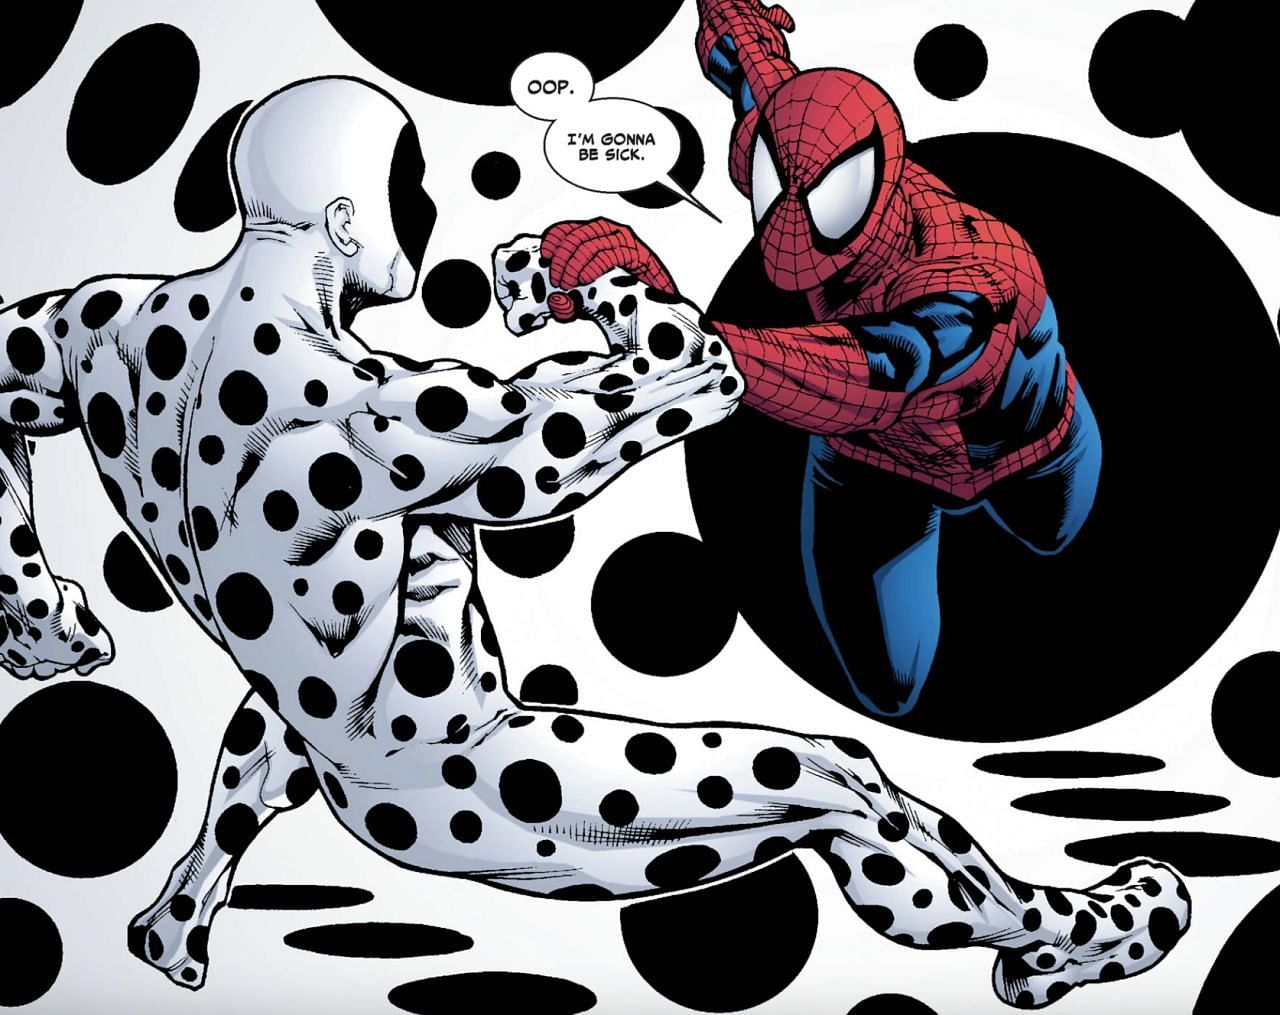 Spider-Man and The Spot in the Darkforce Dimension (Image via Marvel)